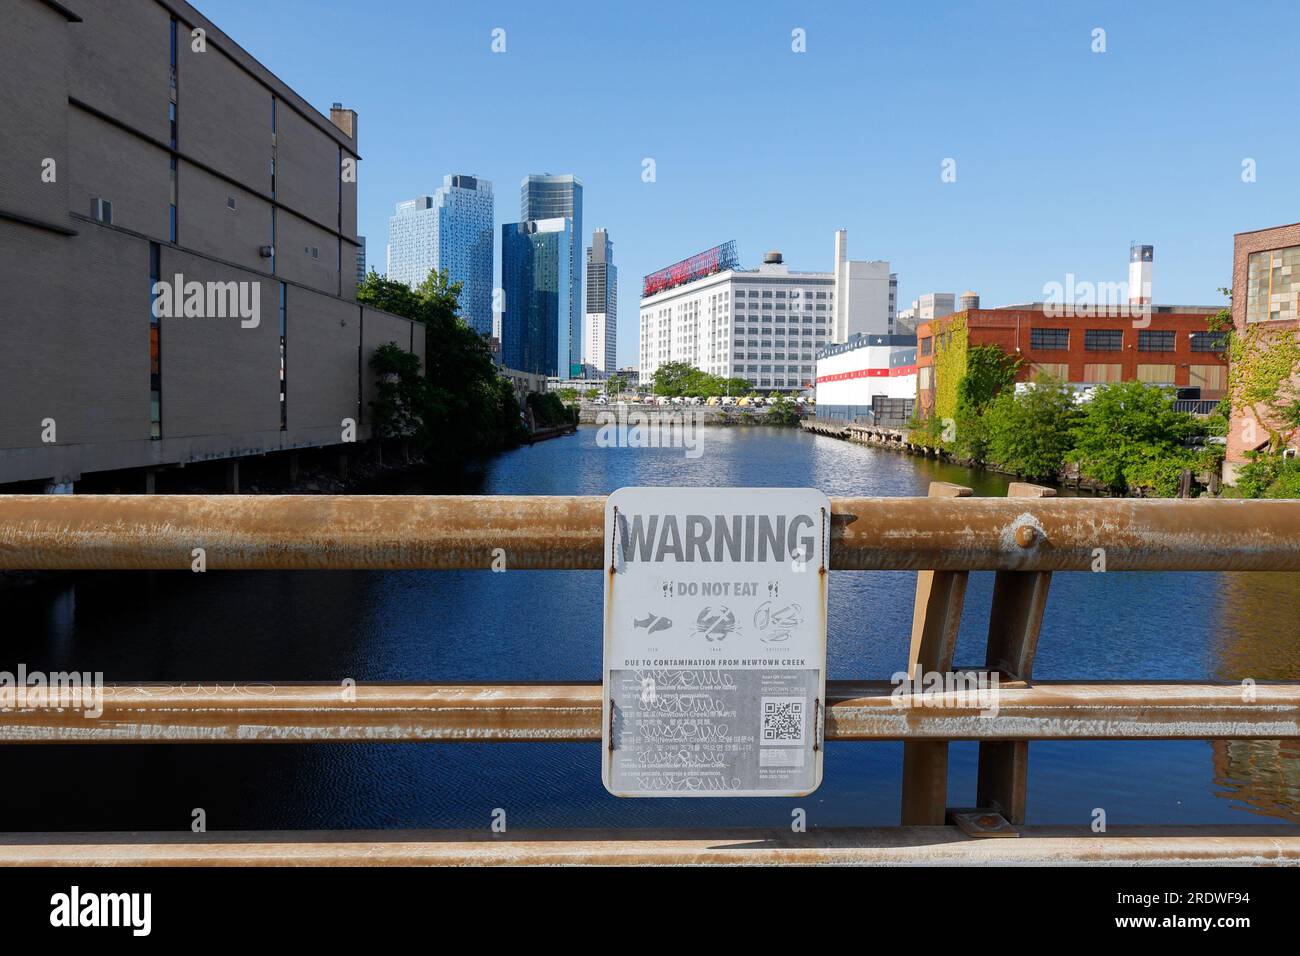 A view of Dutch Kills--a section of Newtown Creek, New York City--with signage warning against eating fish and shellfish from the tidal estuary. Stock Photo